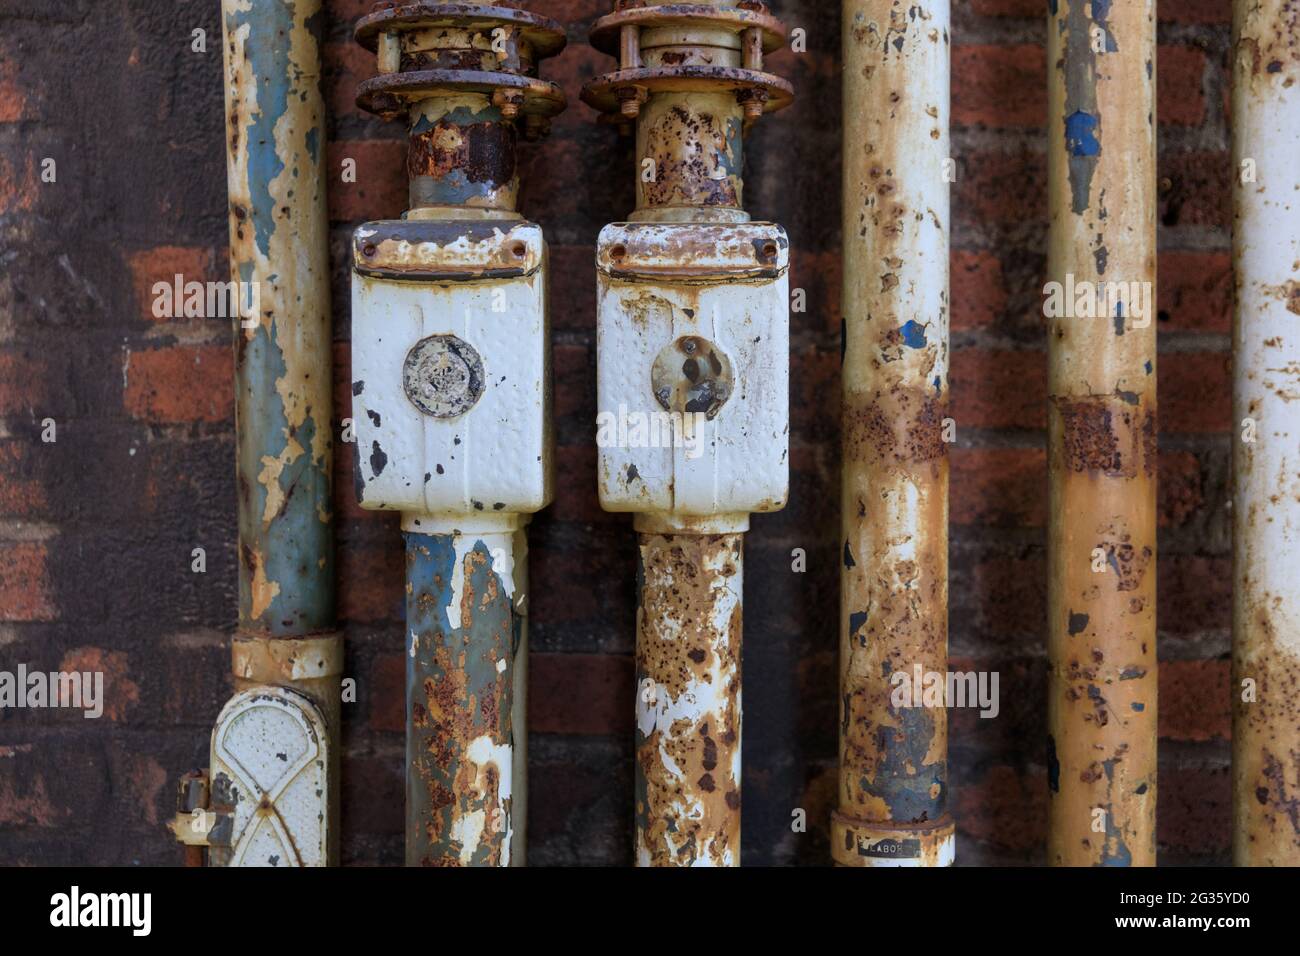 Industrial structures and pipes, former ironworks and steel manufacturing, Germany Stock Photo